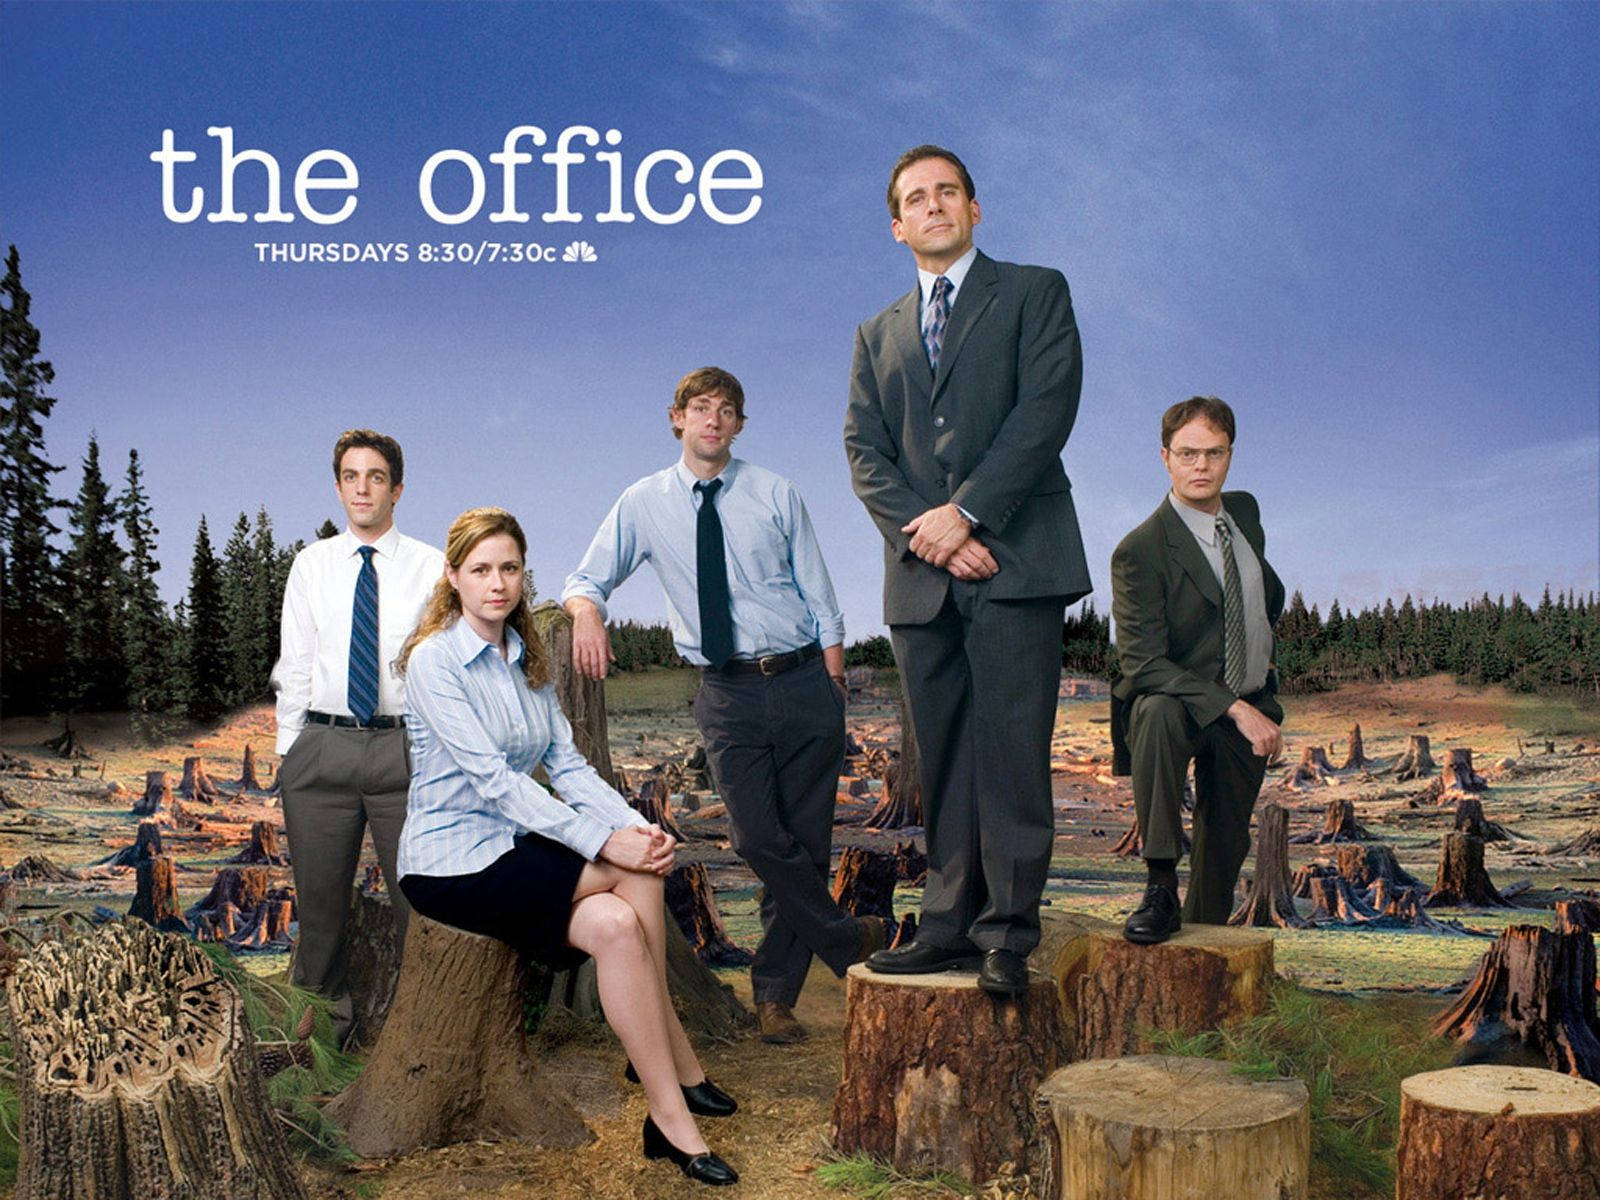 The Office season 4 poster - Cheers! Wallpaper